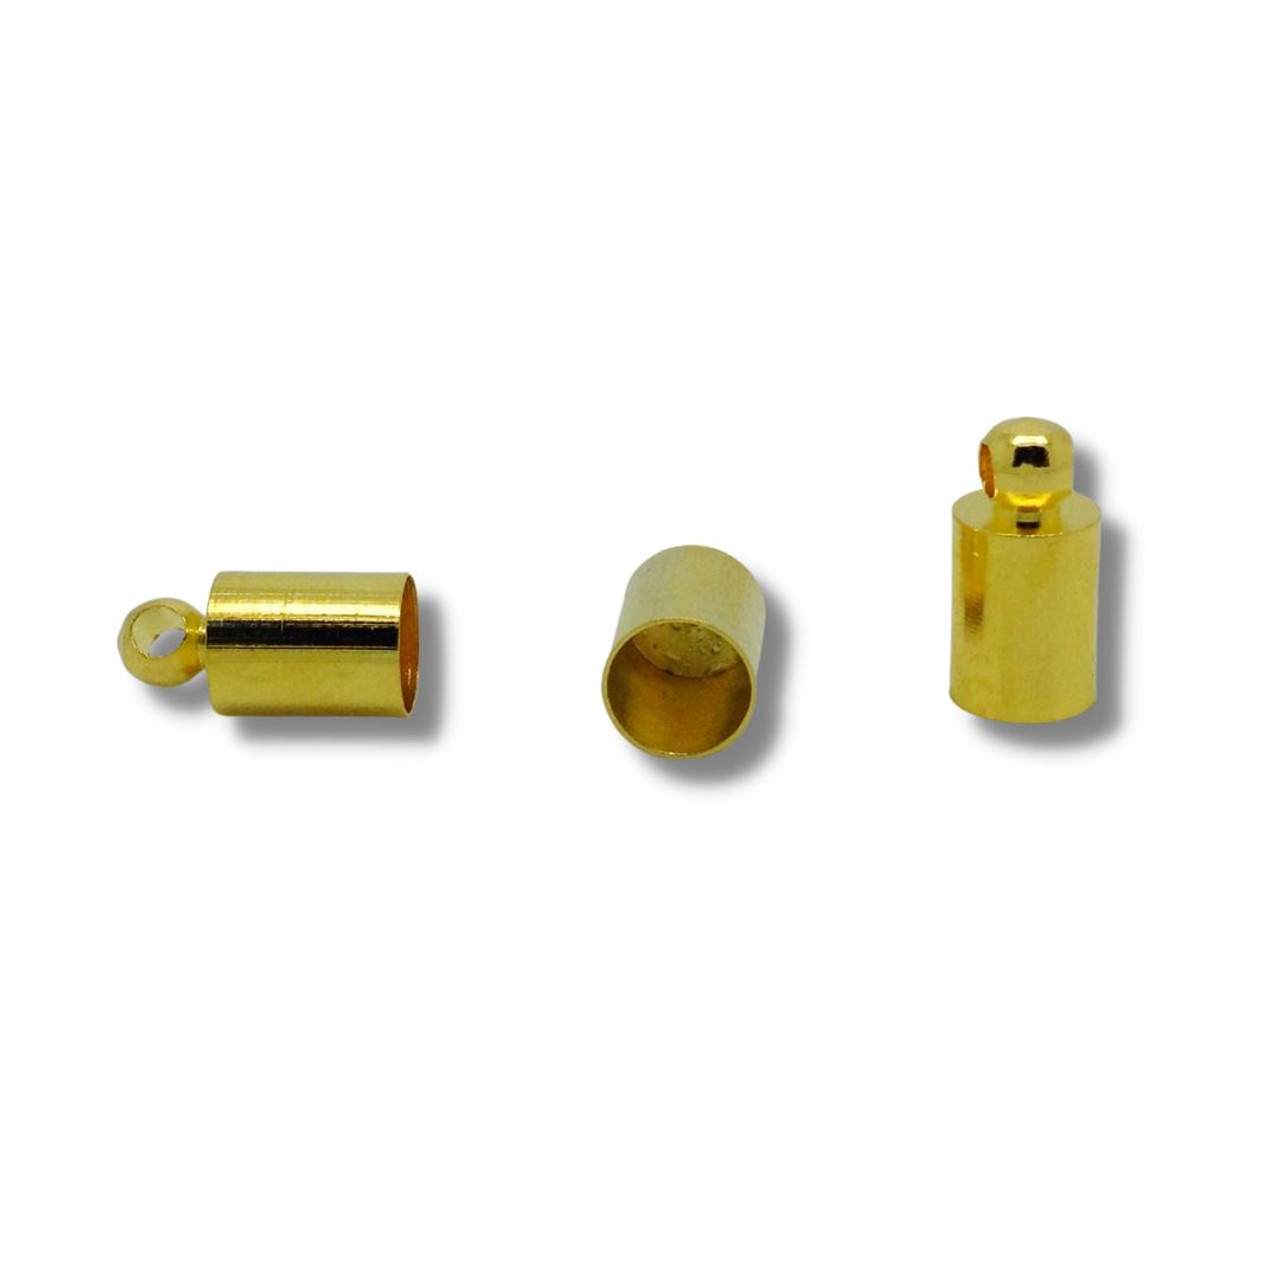 Brass Cord Ends 14mm x 10mm - Pack of 20, Gold coloured